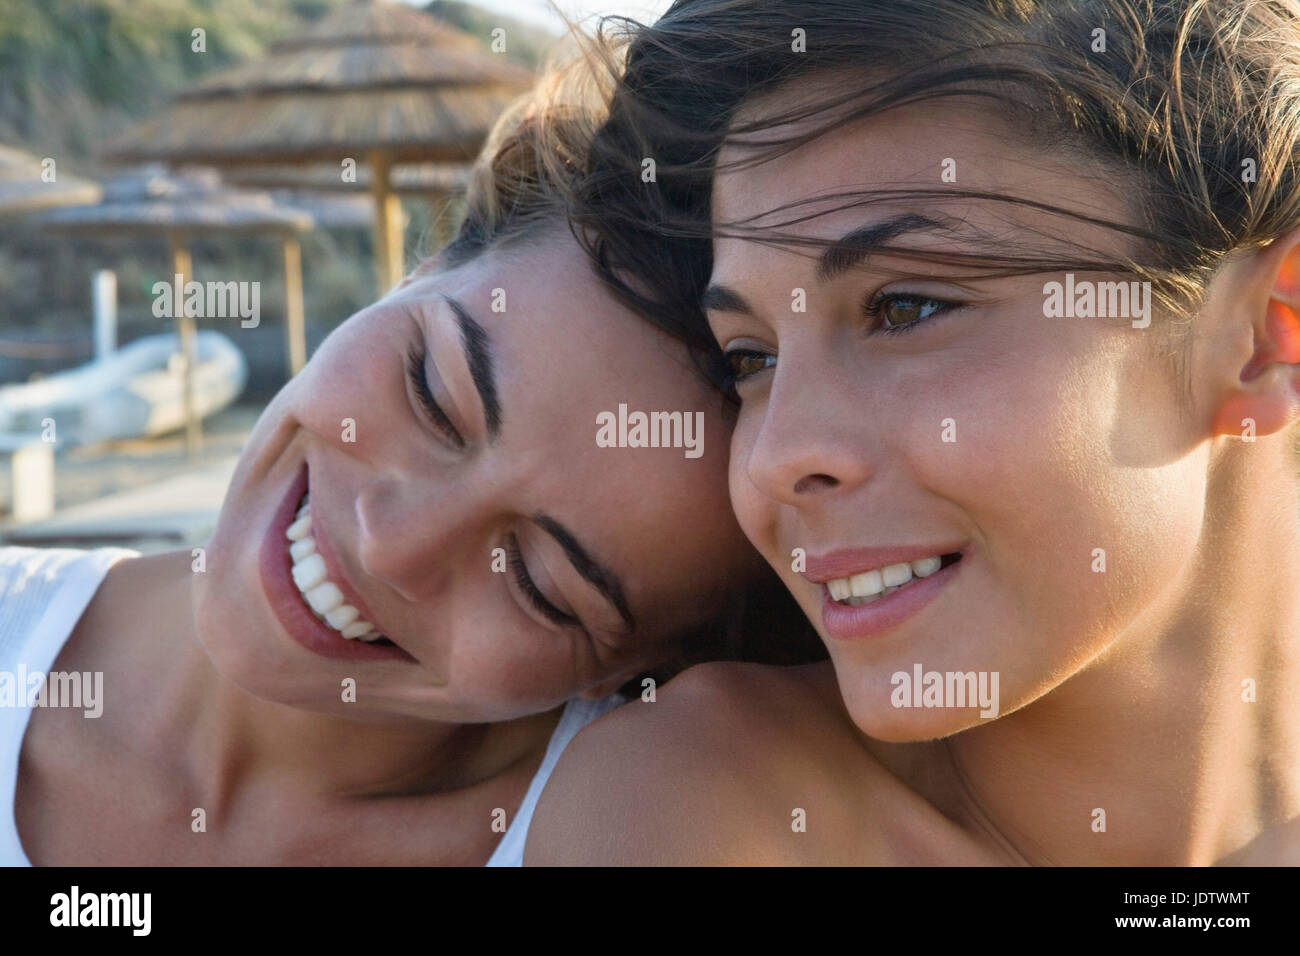 Close-up of two attractive smiling women Stock Photo